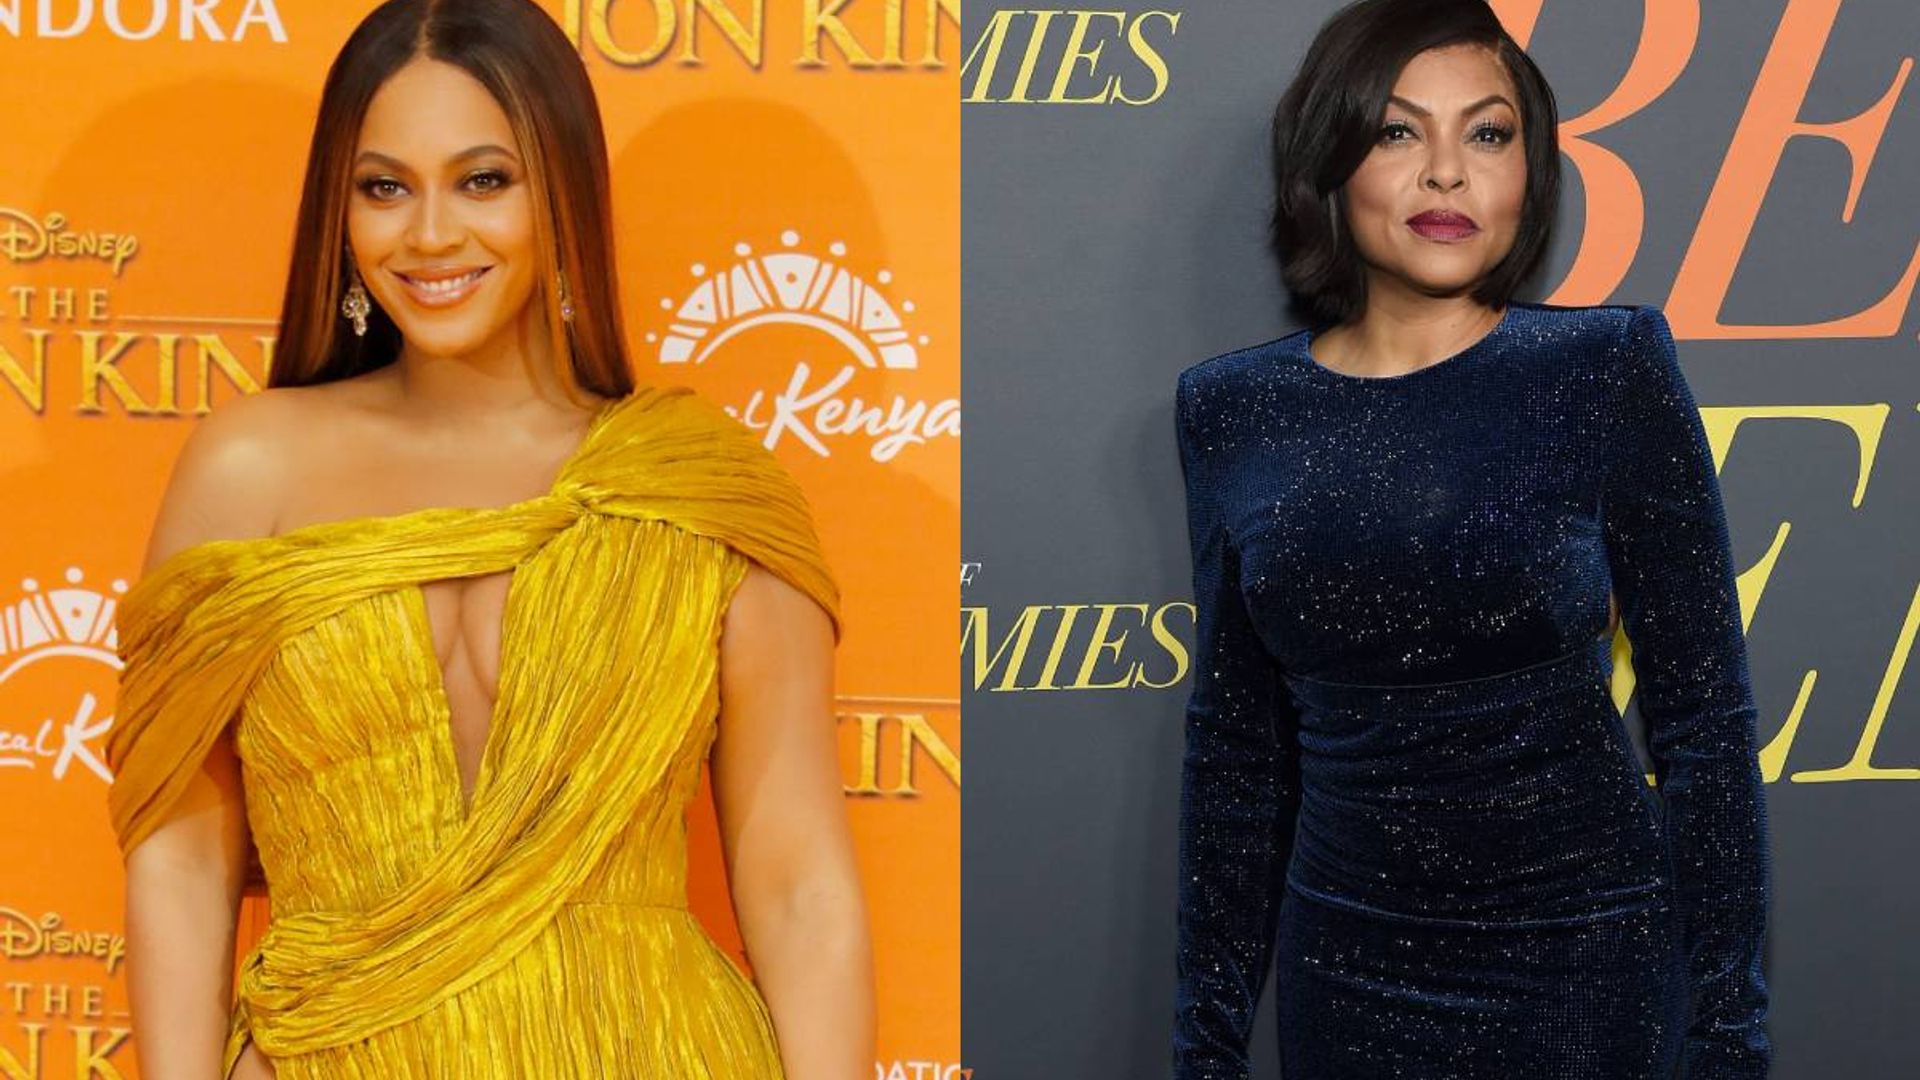 Beyoncé gave Taraji P. Henson the Valentine’s Day gift we all wanted